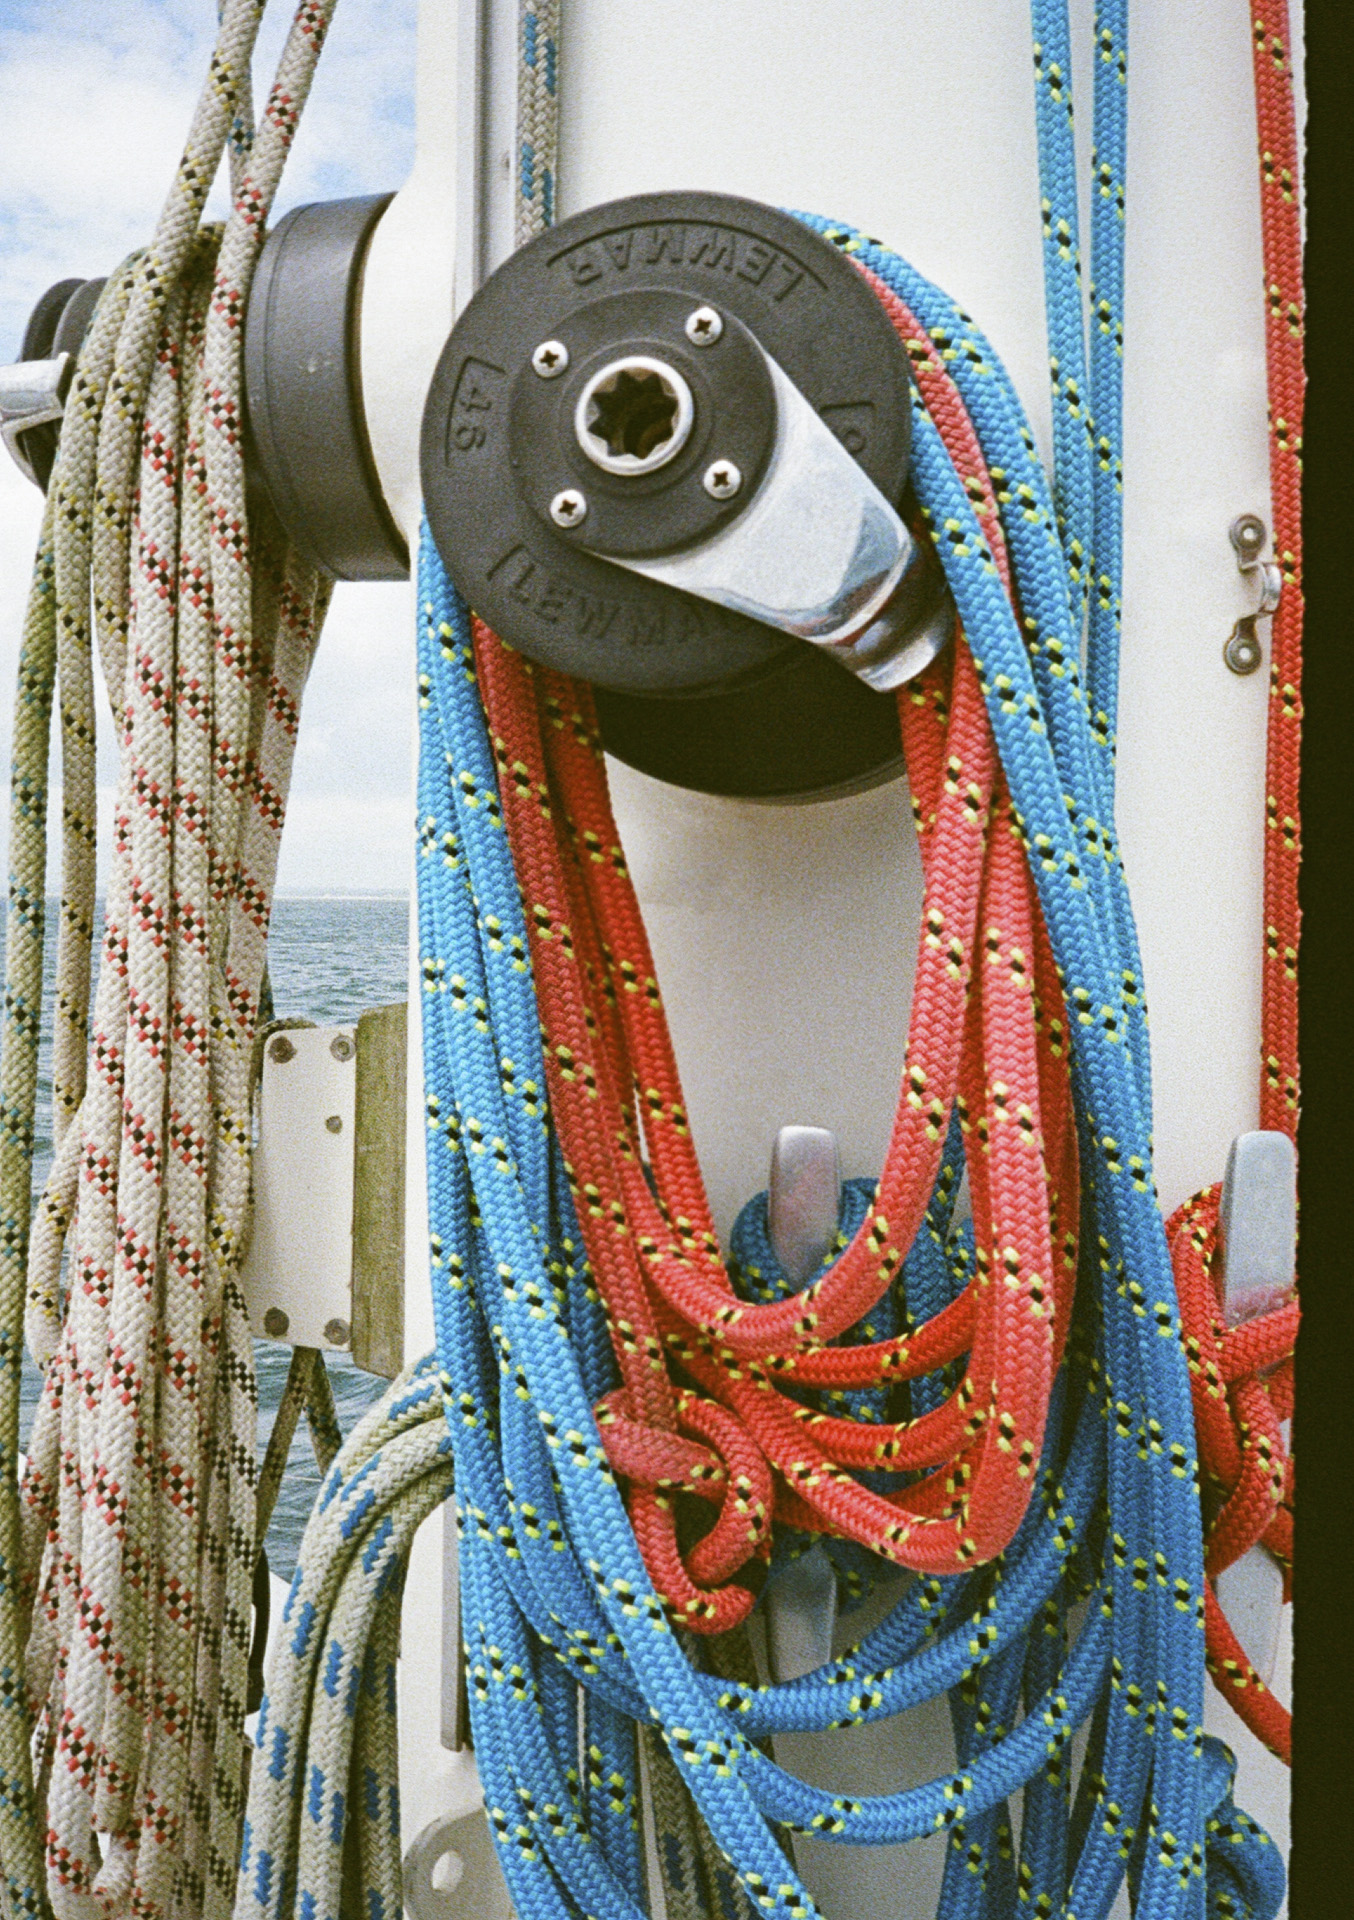 Pentax 17 films scans of sailing and yacht details